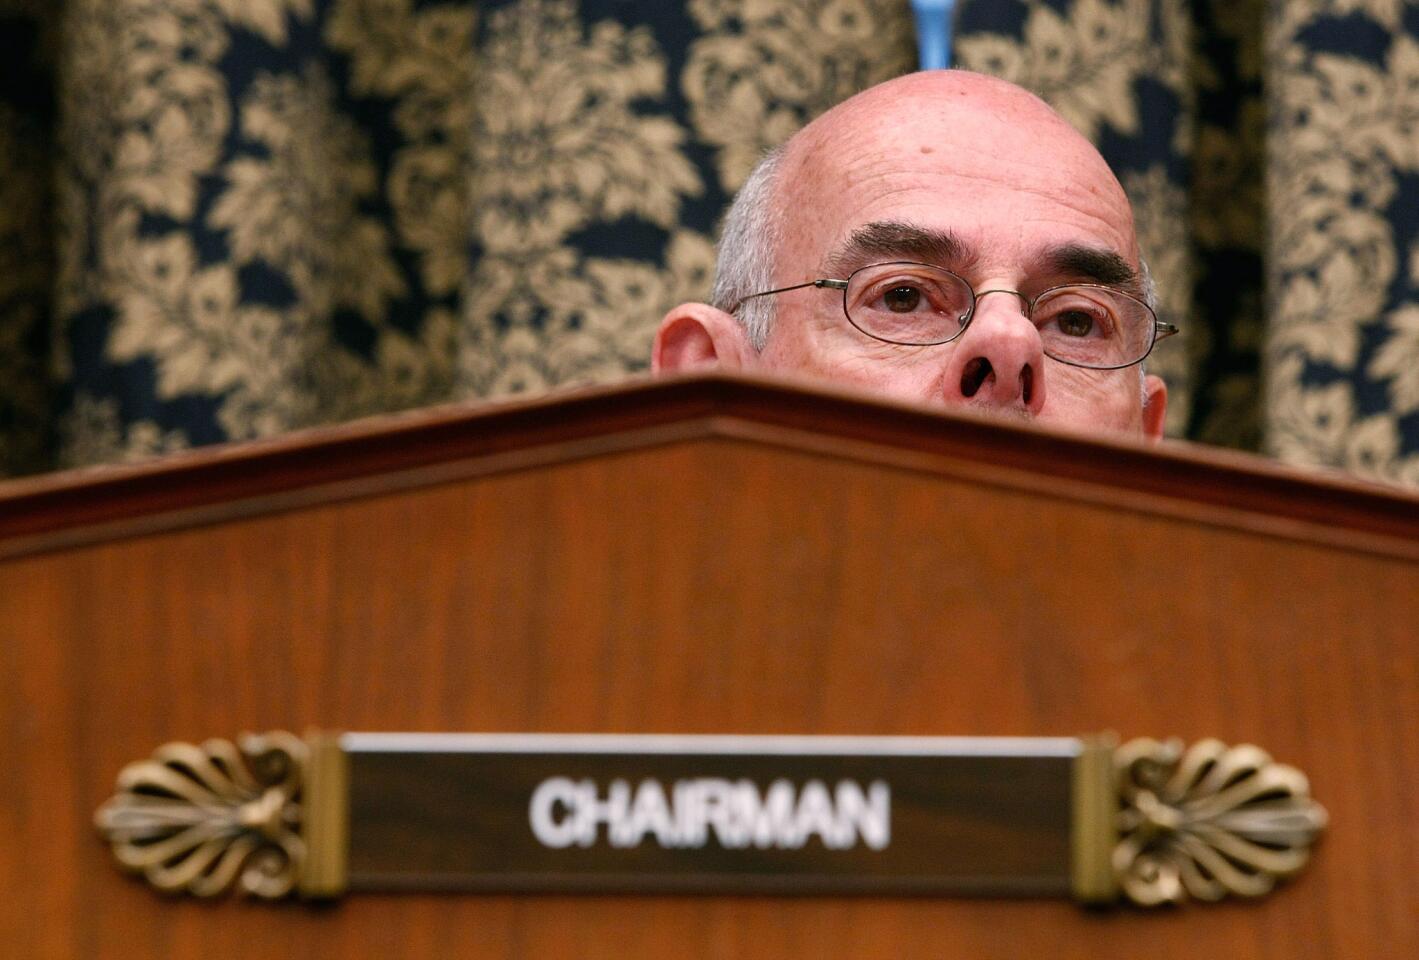 Waxman, as chairman of the House Oversight and Government Reform Committee, listens to testimony during a 2008 hearing on the role of Fannie Mae and Freddie Mac in the U.S. financial crisis.